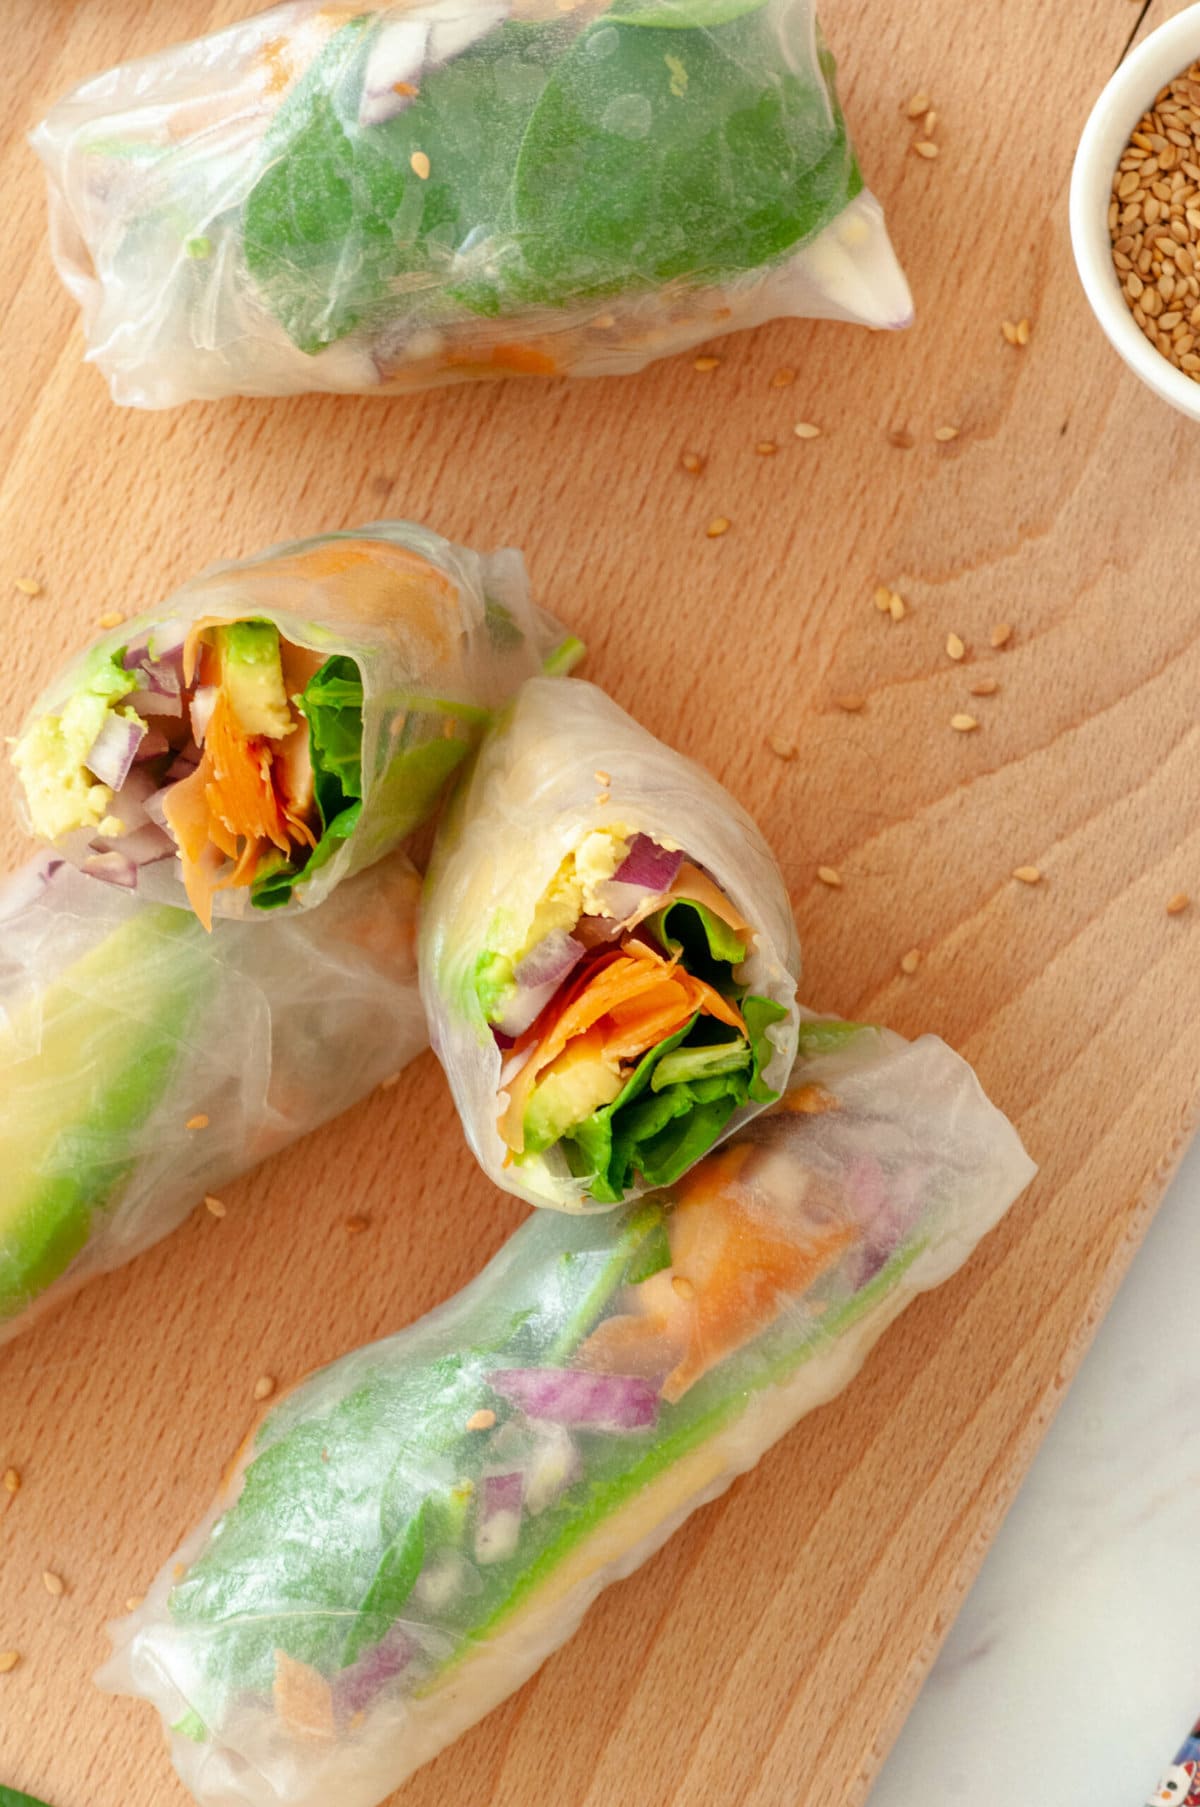 Zoom in on a spring roll cut in half, with the filling visible.